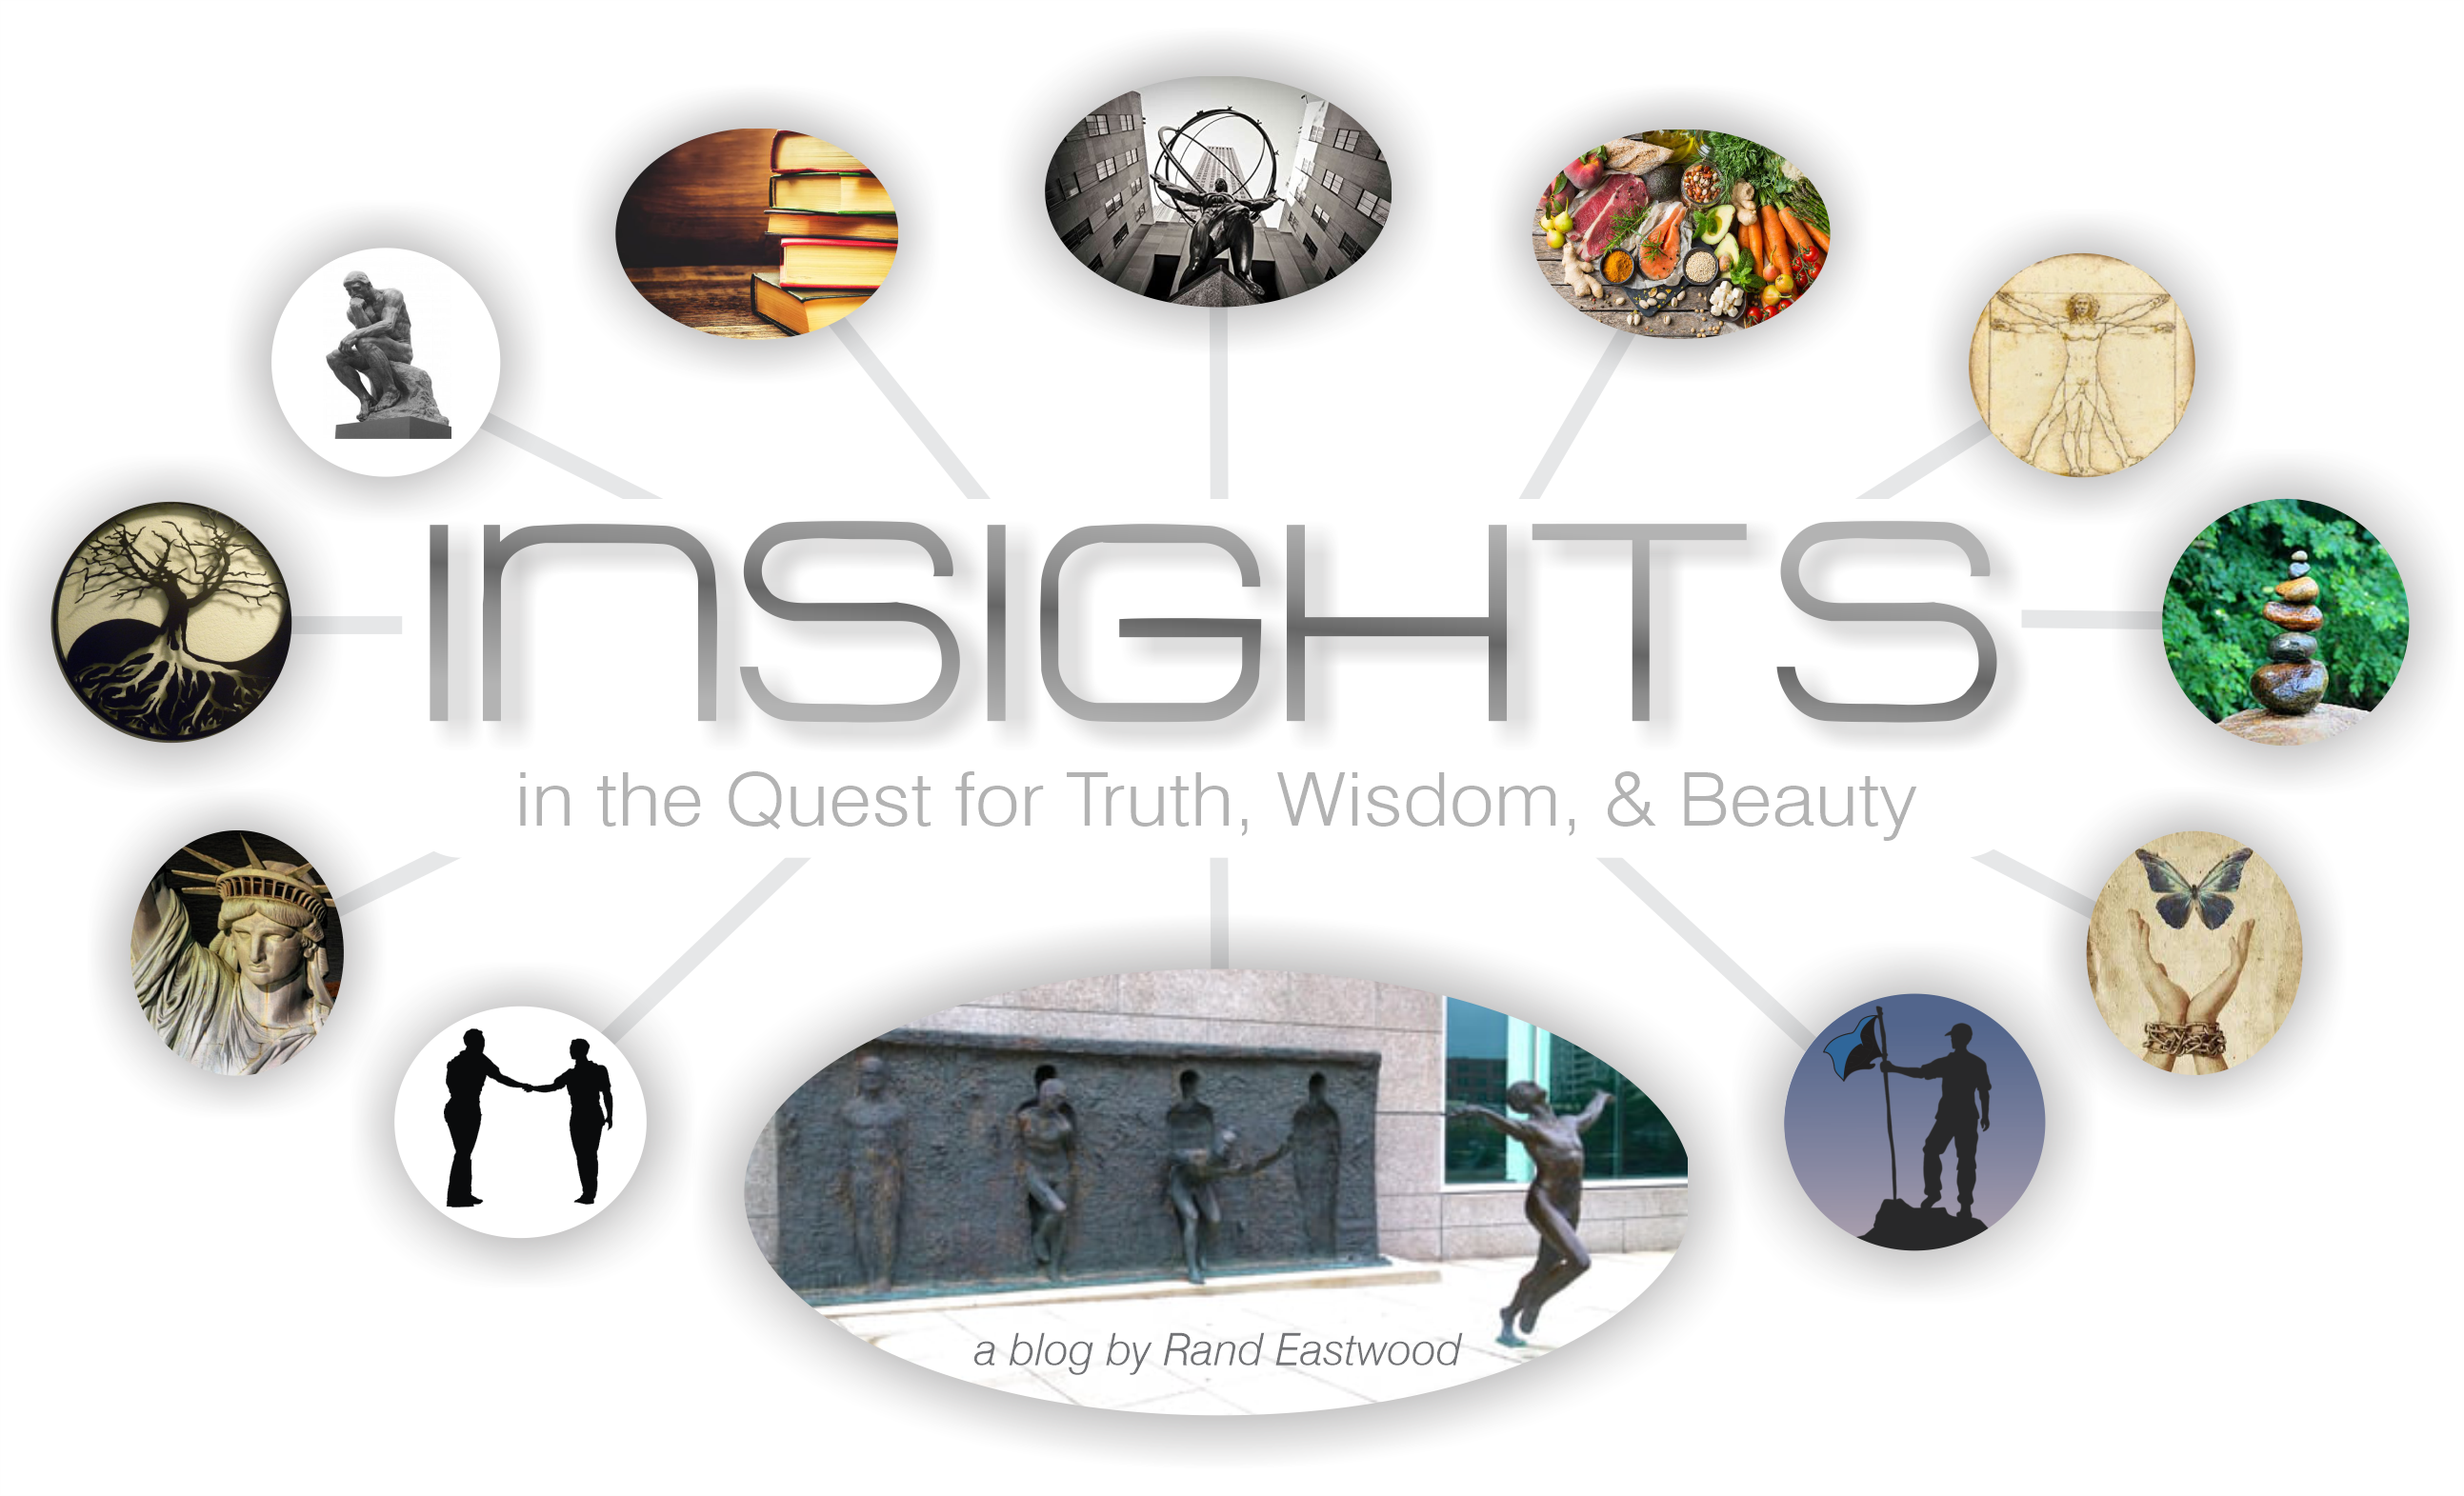 A Quest for Truth, Wisdom, & Beauty